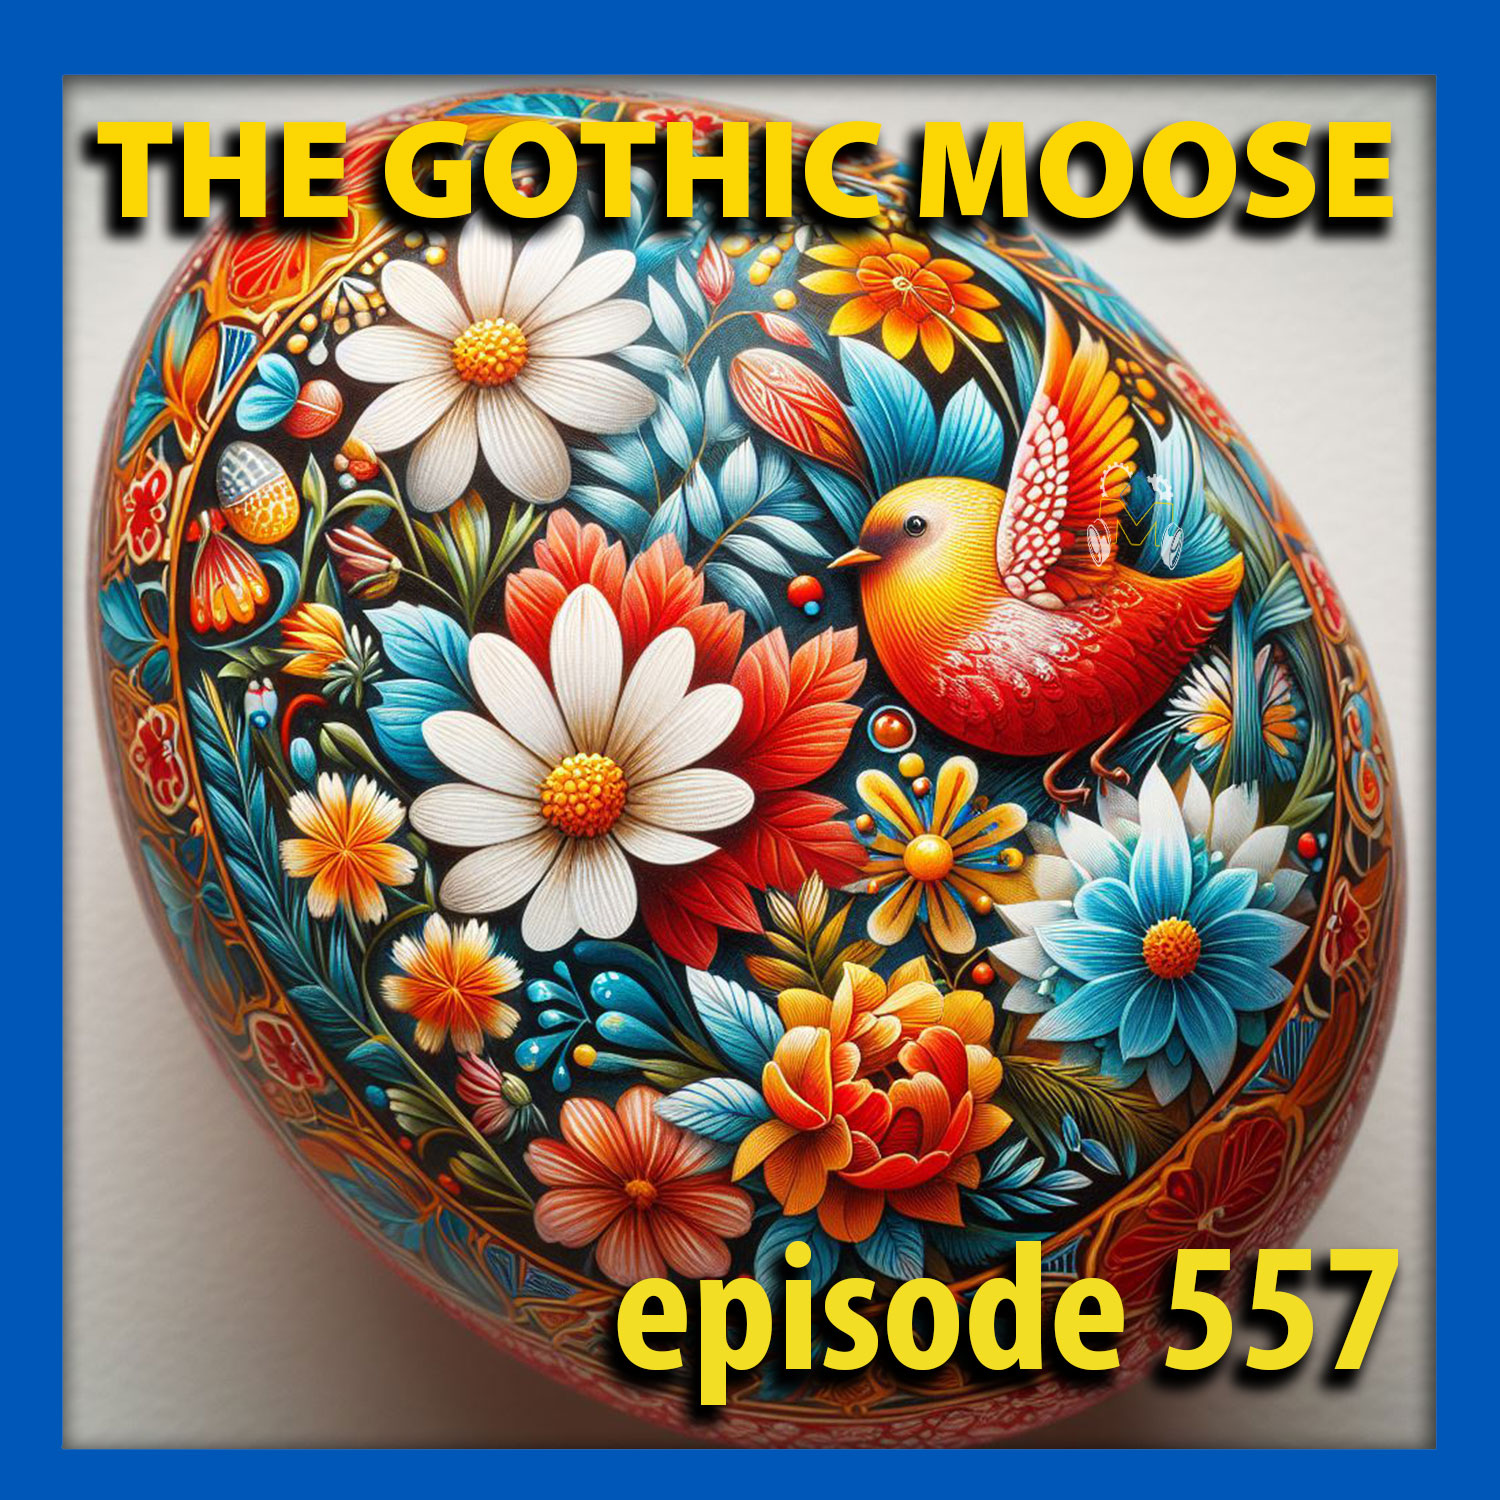 The Gothic Moose – Episode 557 – All Ukrainian bands or bands supporting Ukraine